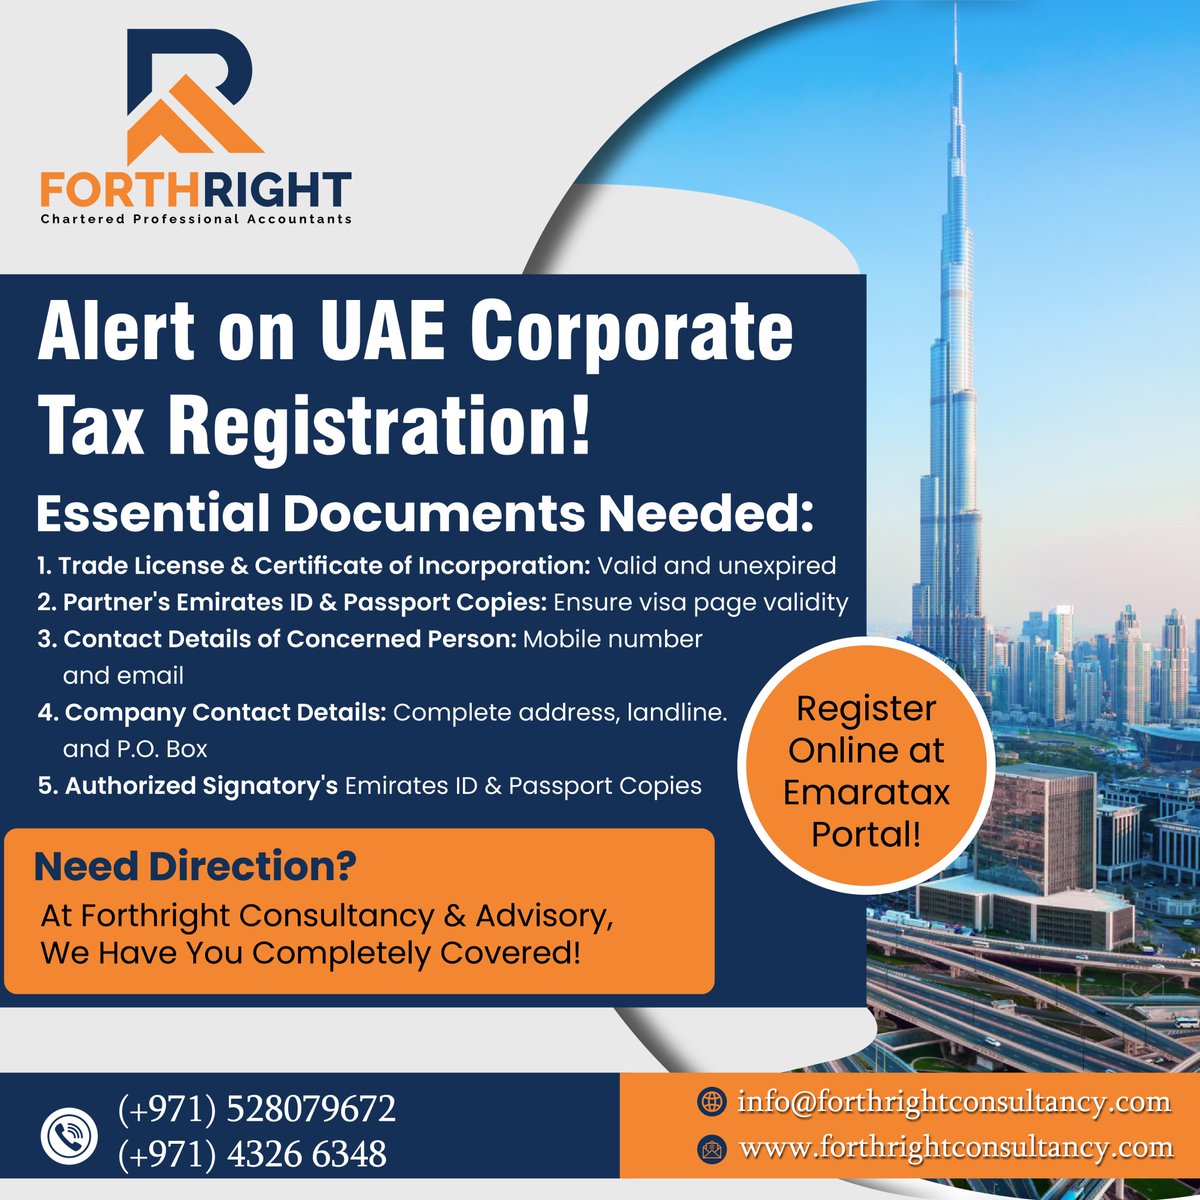 Alert on UAE Corporate Tax Registration!
.
📞Call us now (+971) 43266348, (+971) 52 807 9672
.
.
#forthrightcompany #forthrightconsultancyinuae #uaecorporate #taxregistration #corporations #uaebased #accountingservices #government #corporatetax #viralpage #taxrateupdates